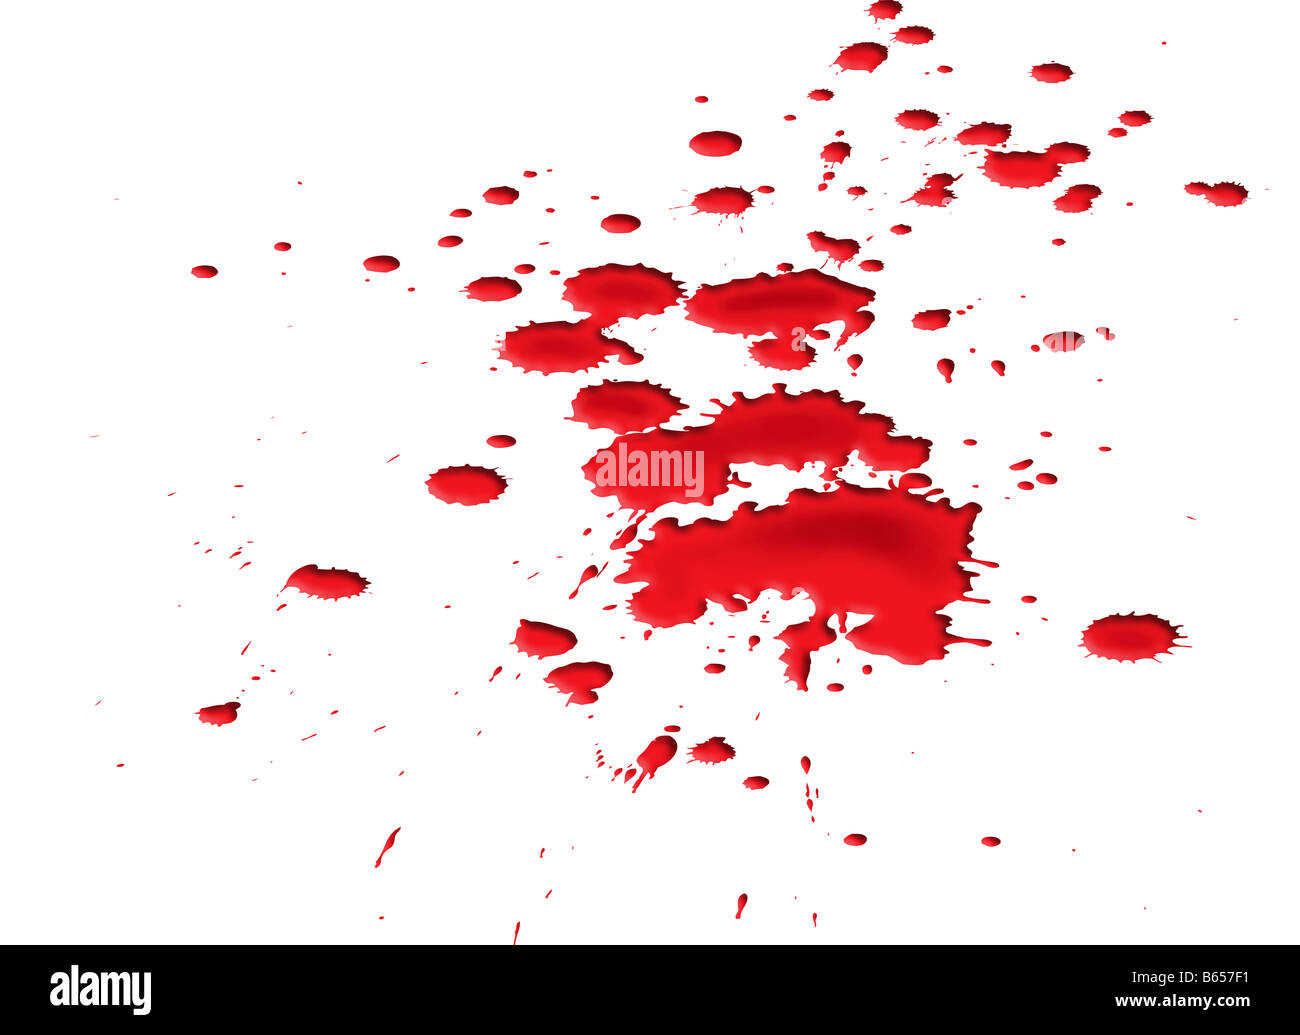 Isolated illustration of a ghastly blood splat Stock Photo